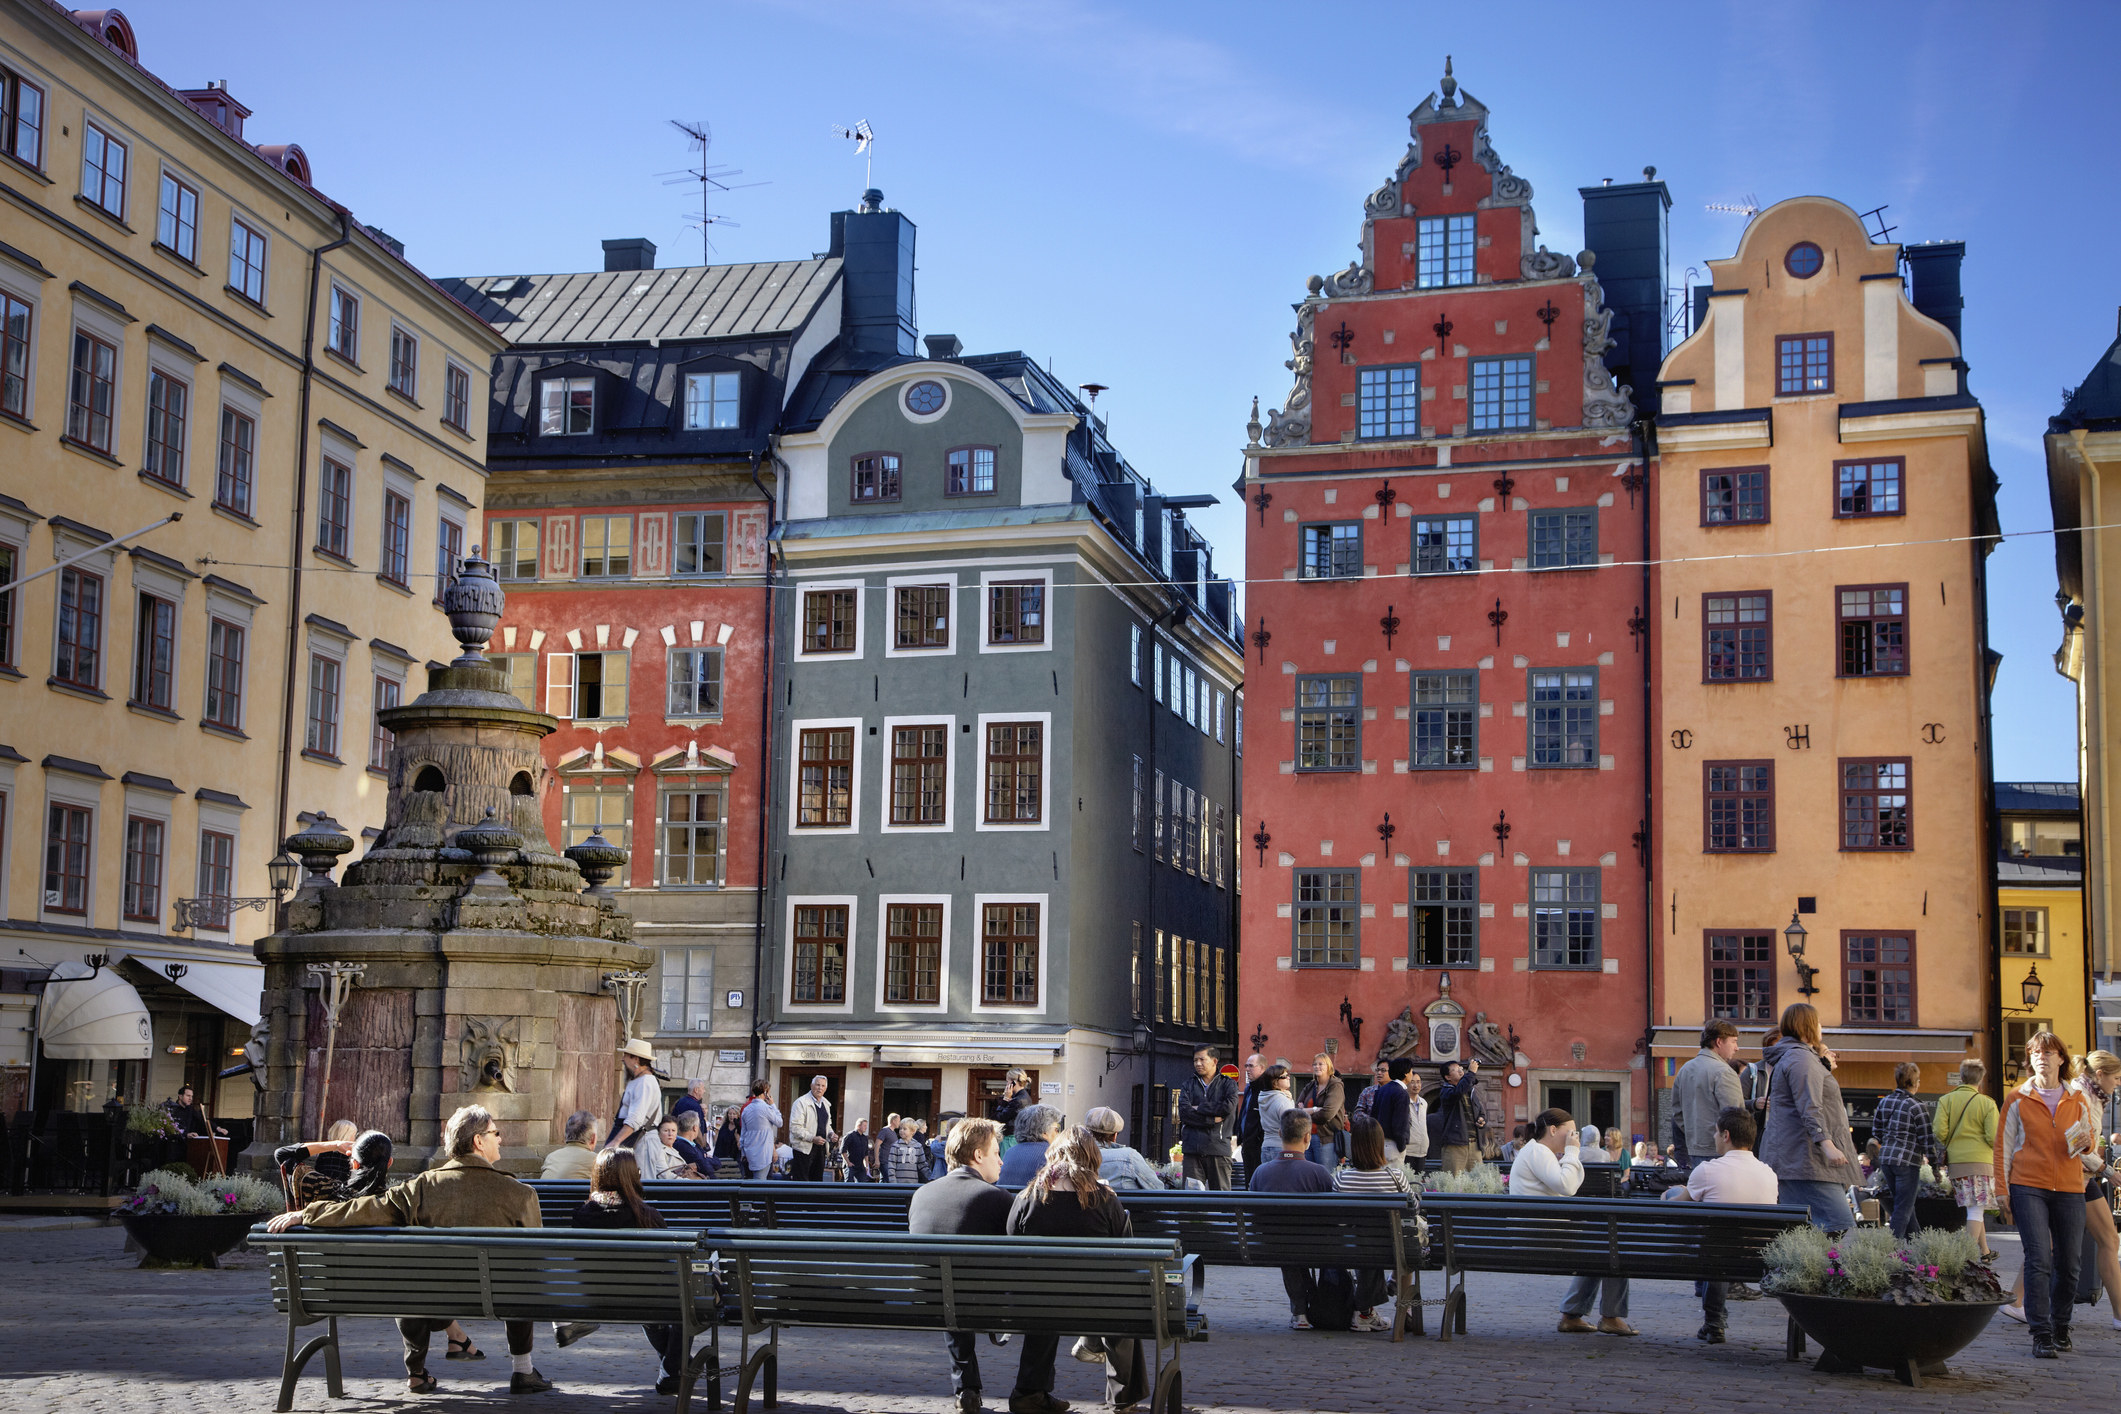 The great square of Stortorget, in Gamla Stan Stockholm Sweden